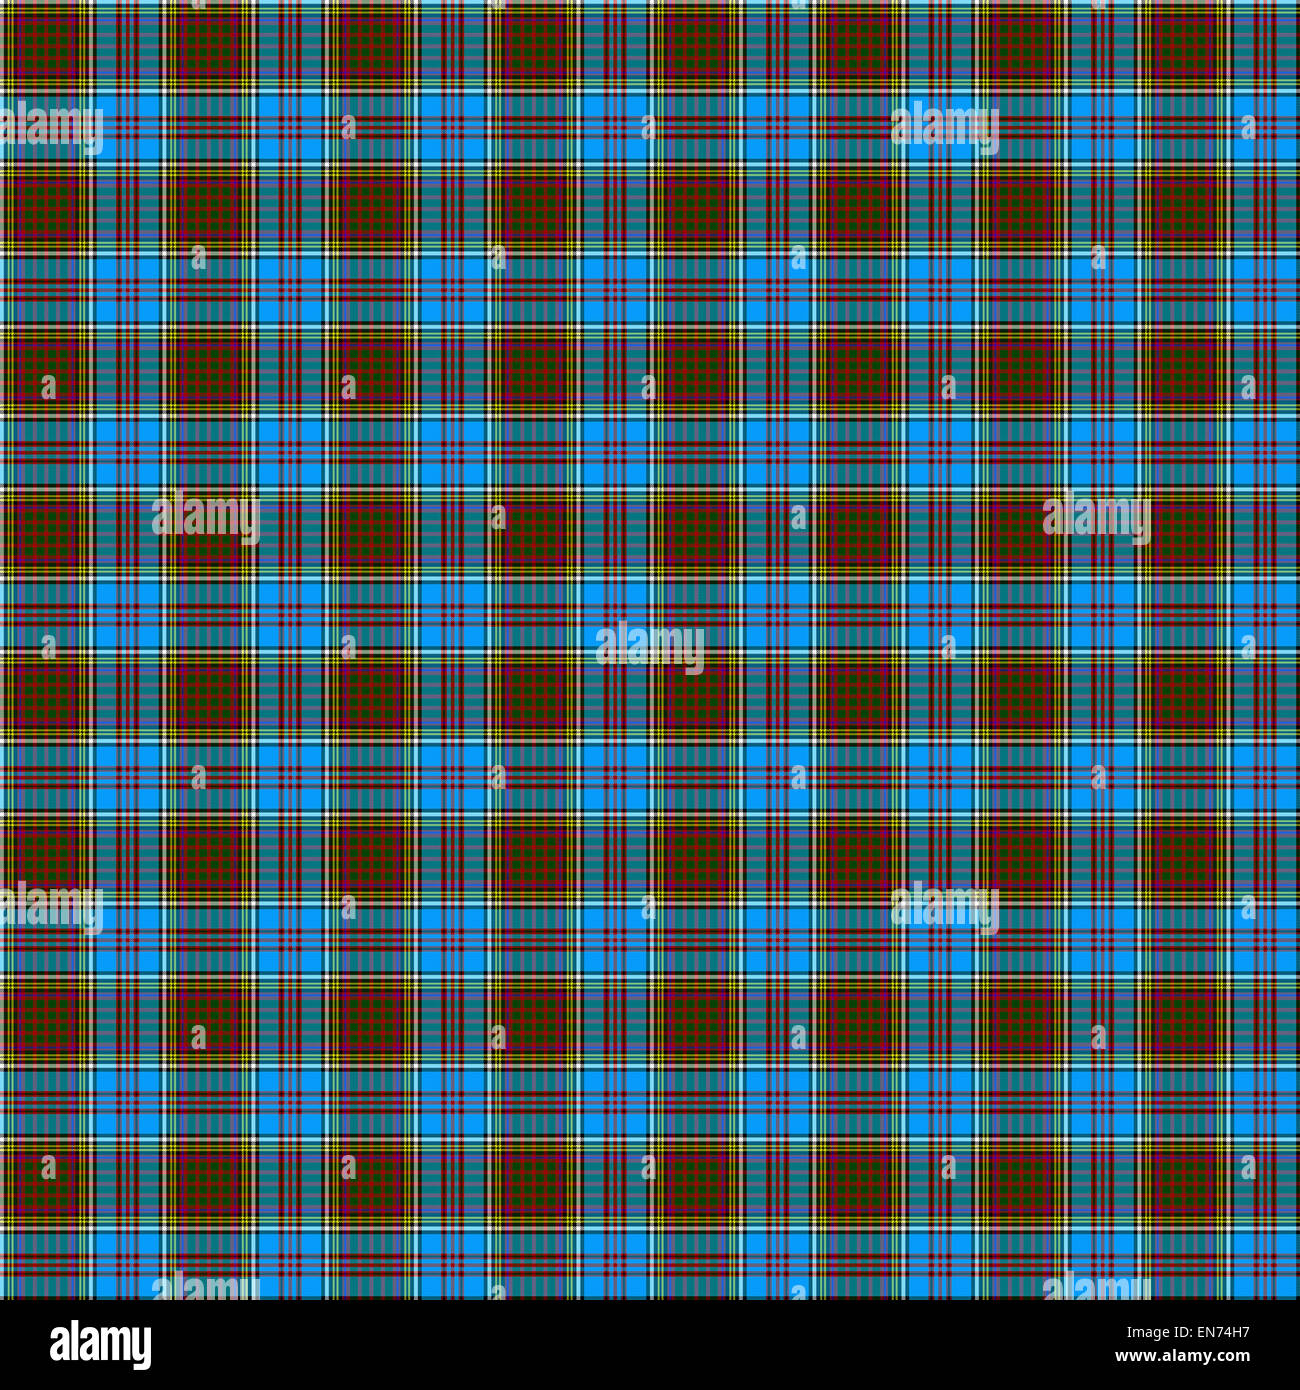 A seamless patterned tile of the clan Anderson tartan. Stock Photo